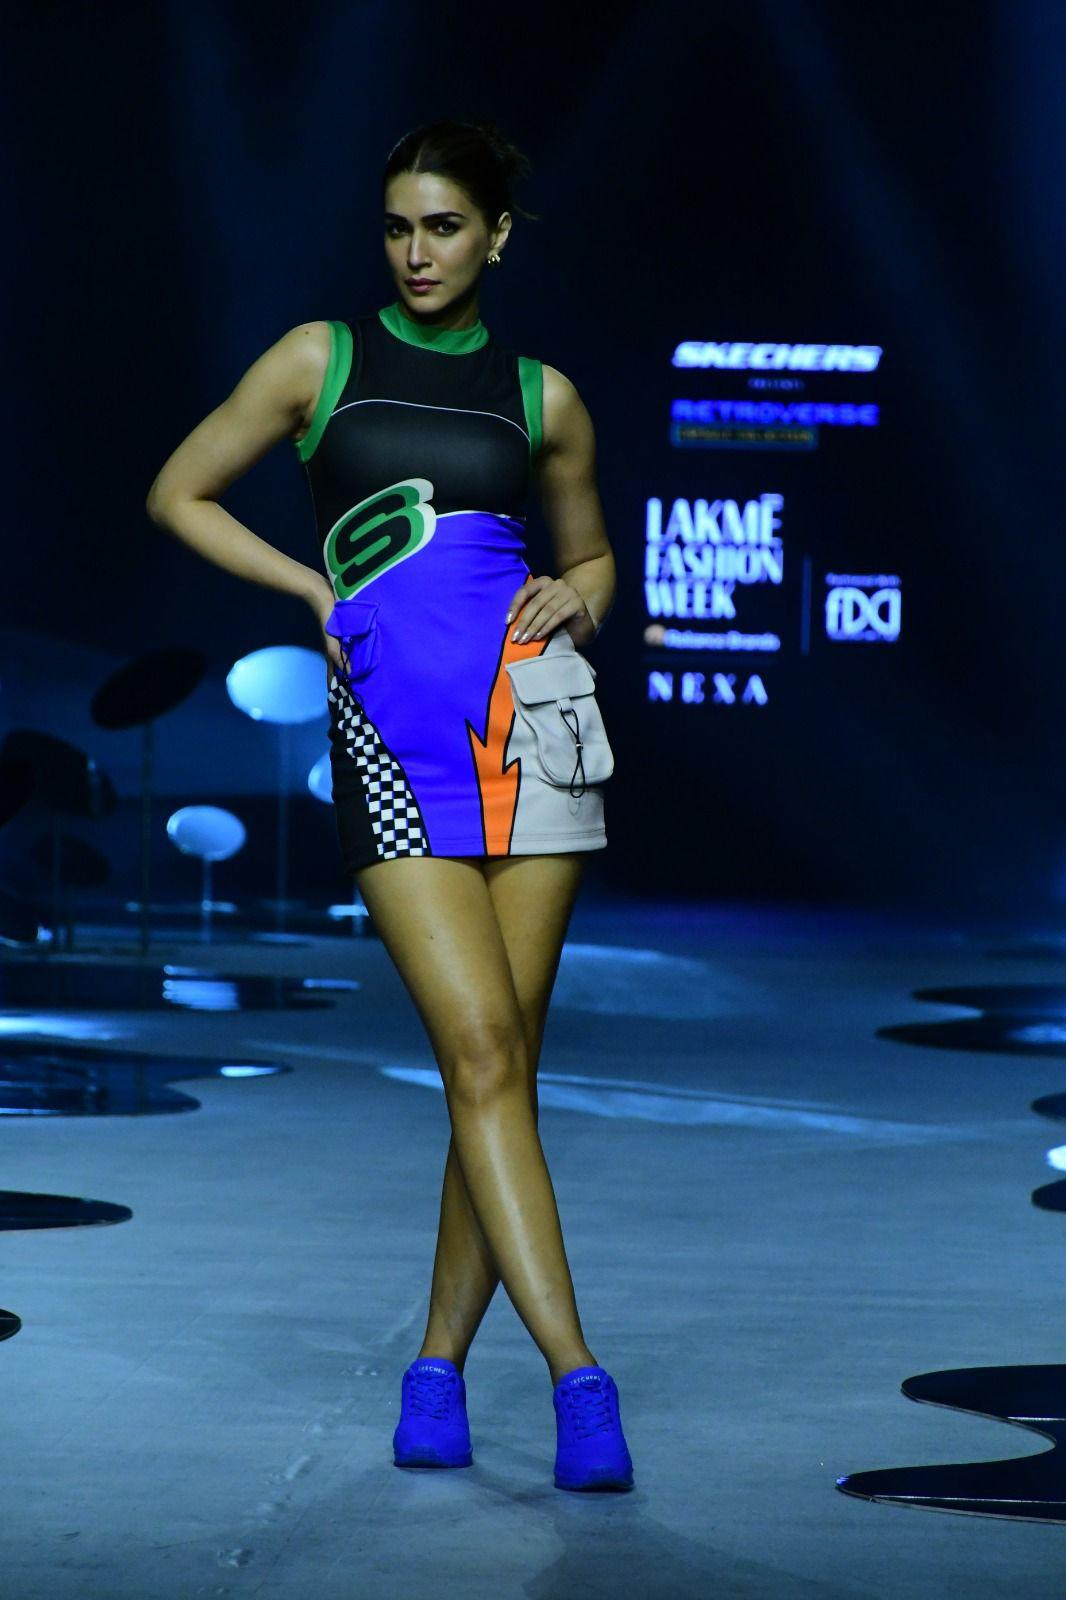 The outfit boasts a round neckline in eye-catching neon green, extending to the sleeves. Vibrant hues of blue and orange inject bursts of colour into the ensemble